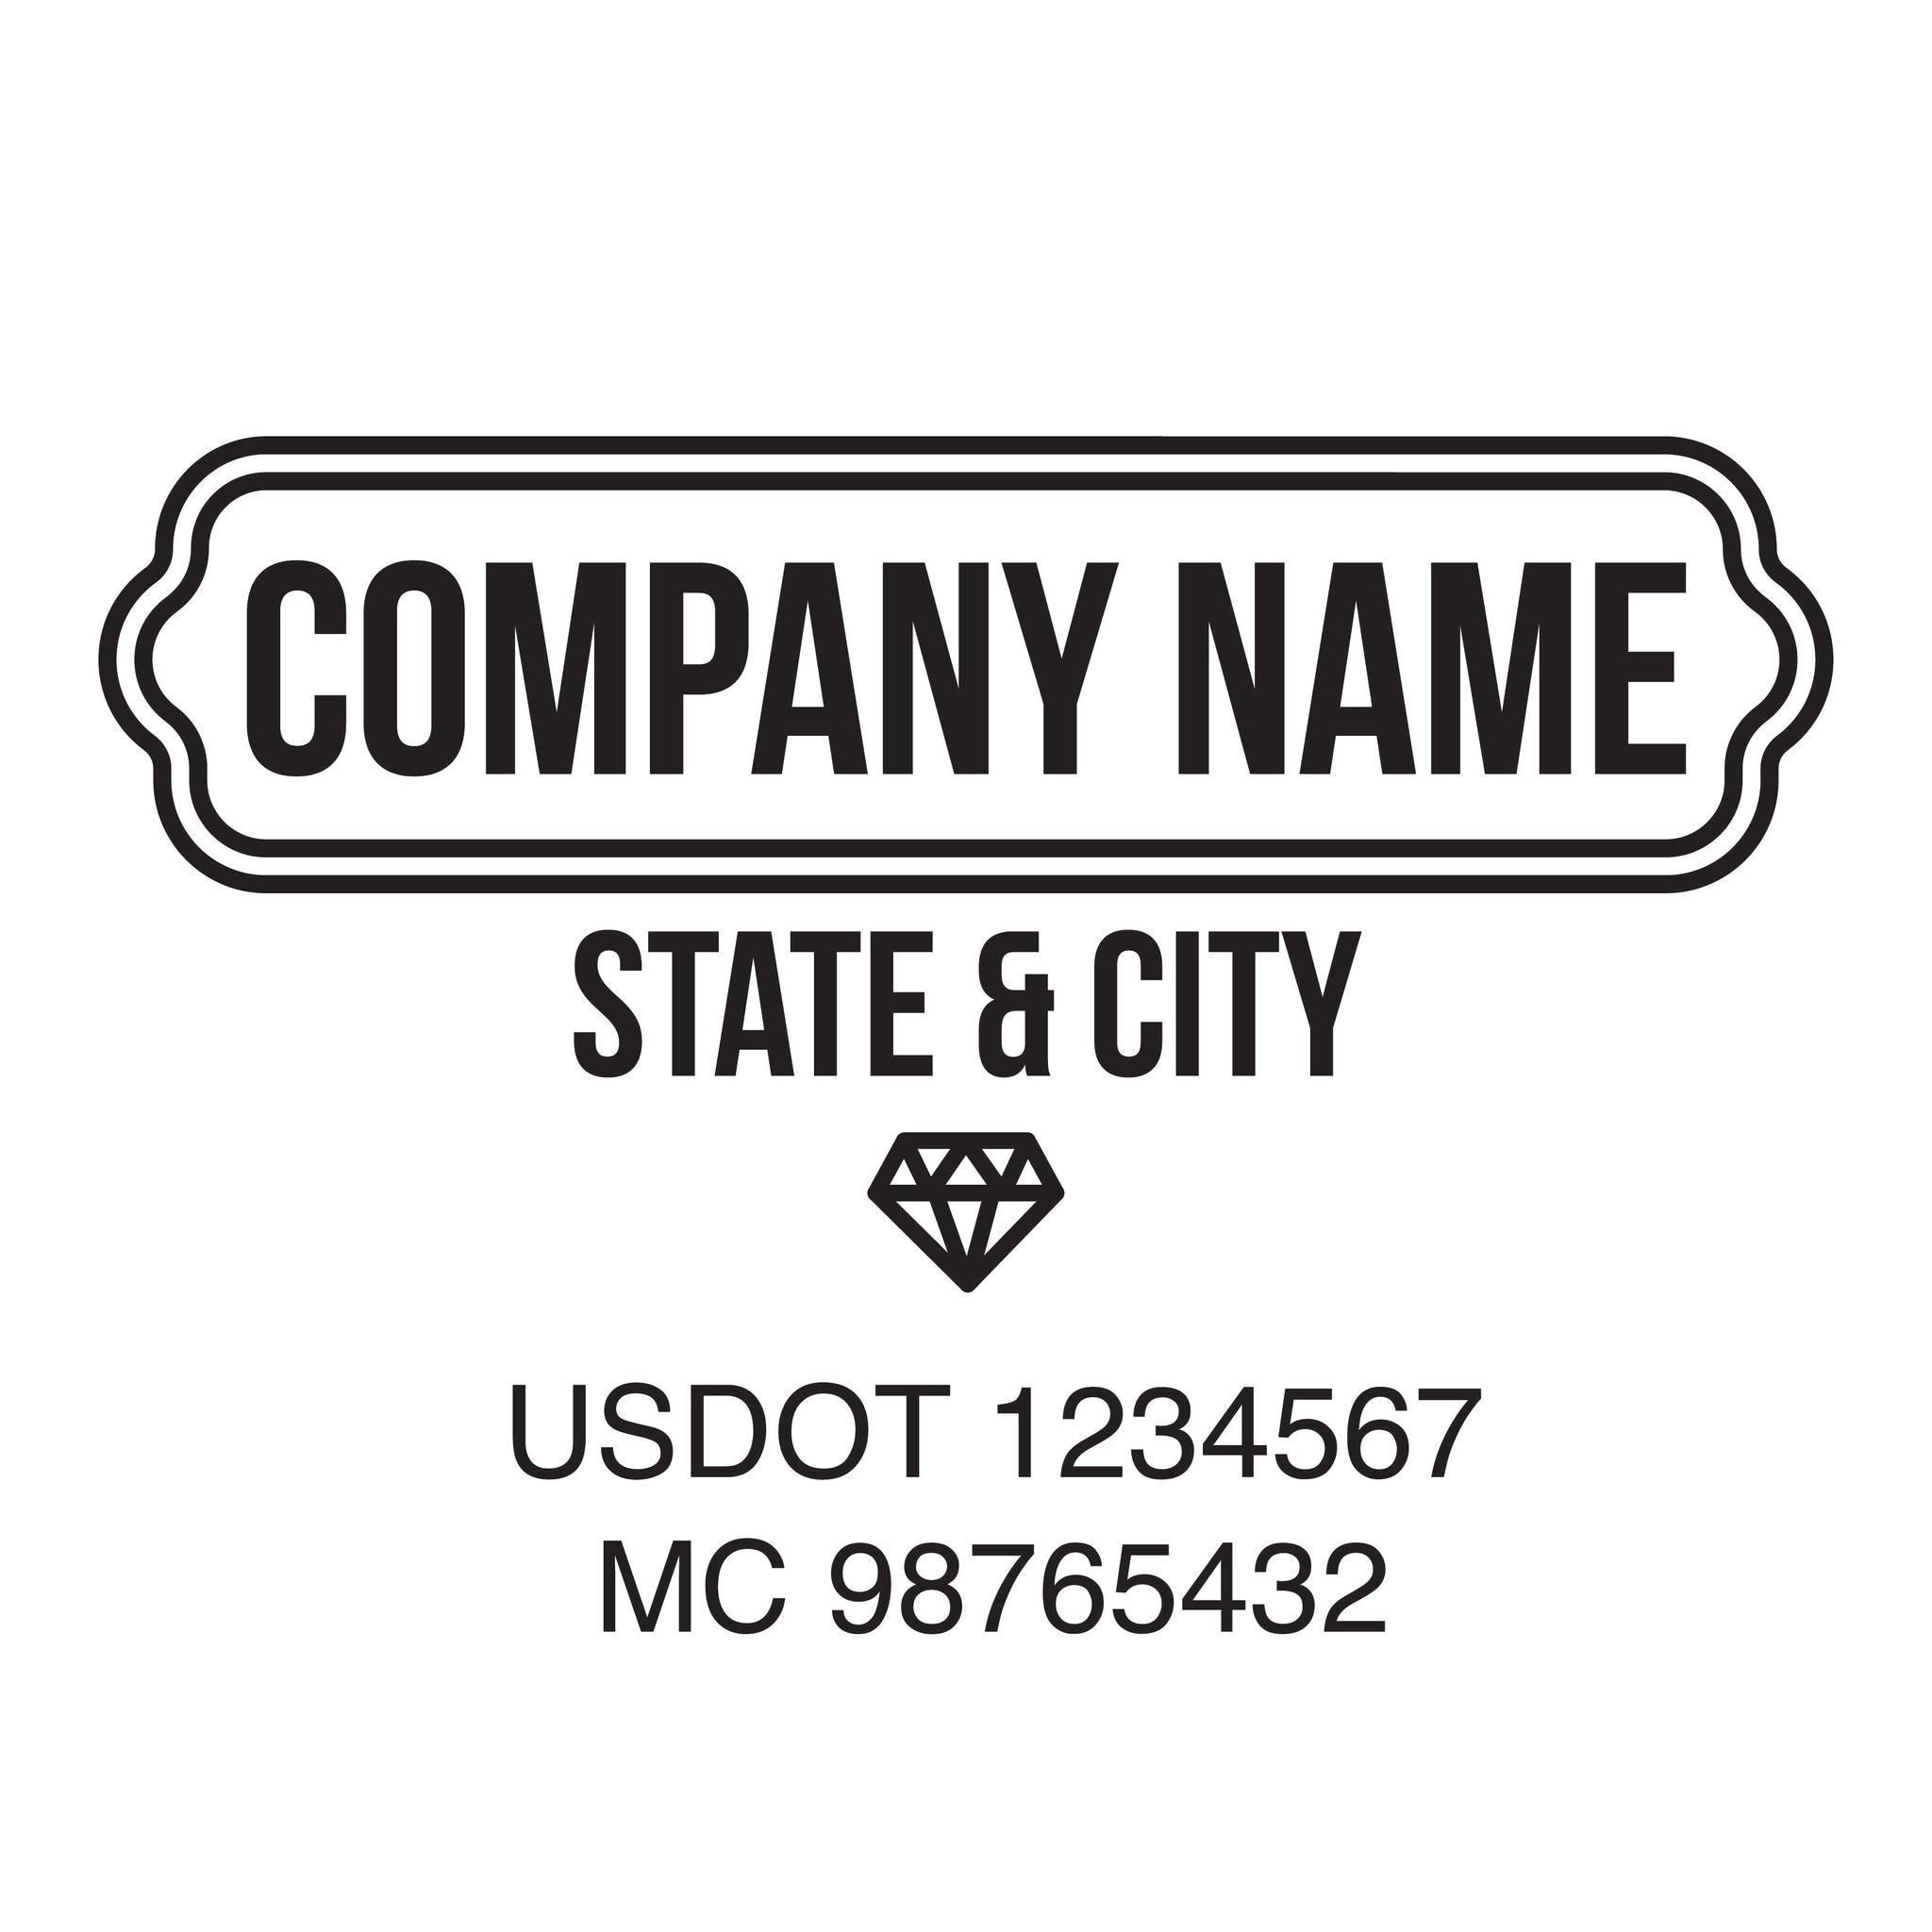 Company name truck decal